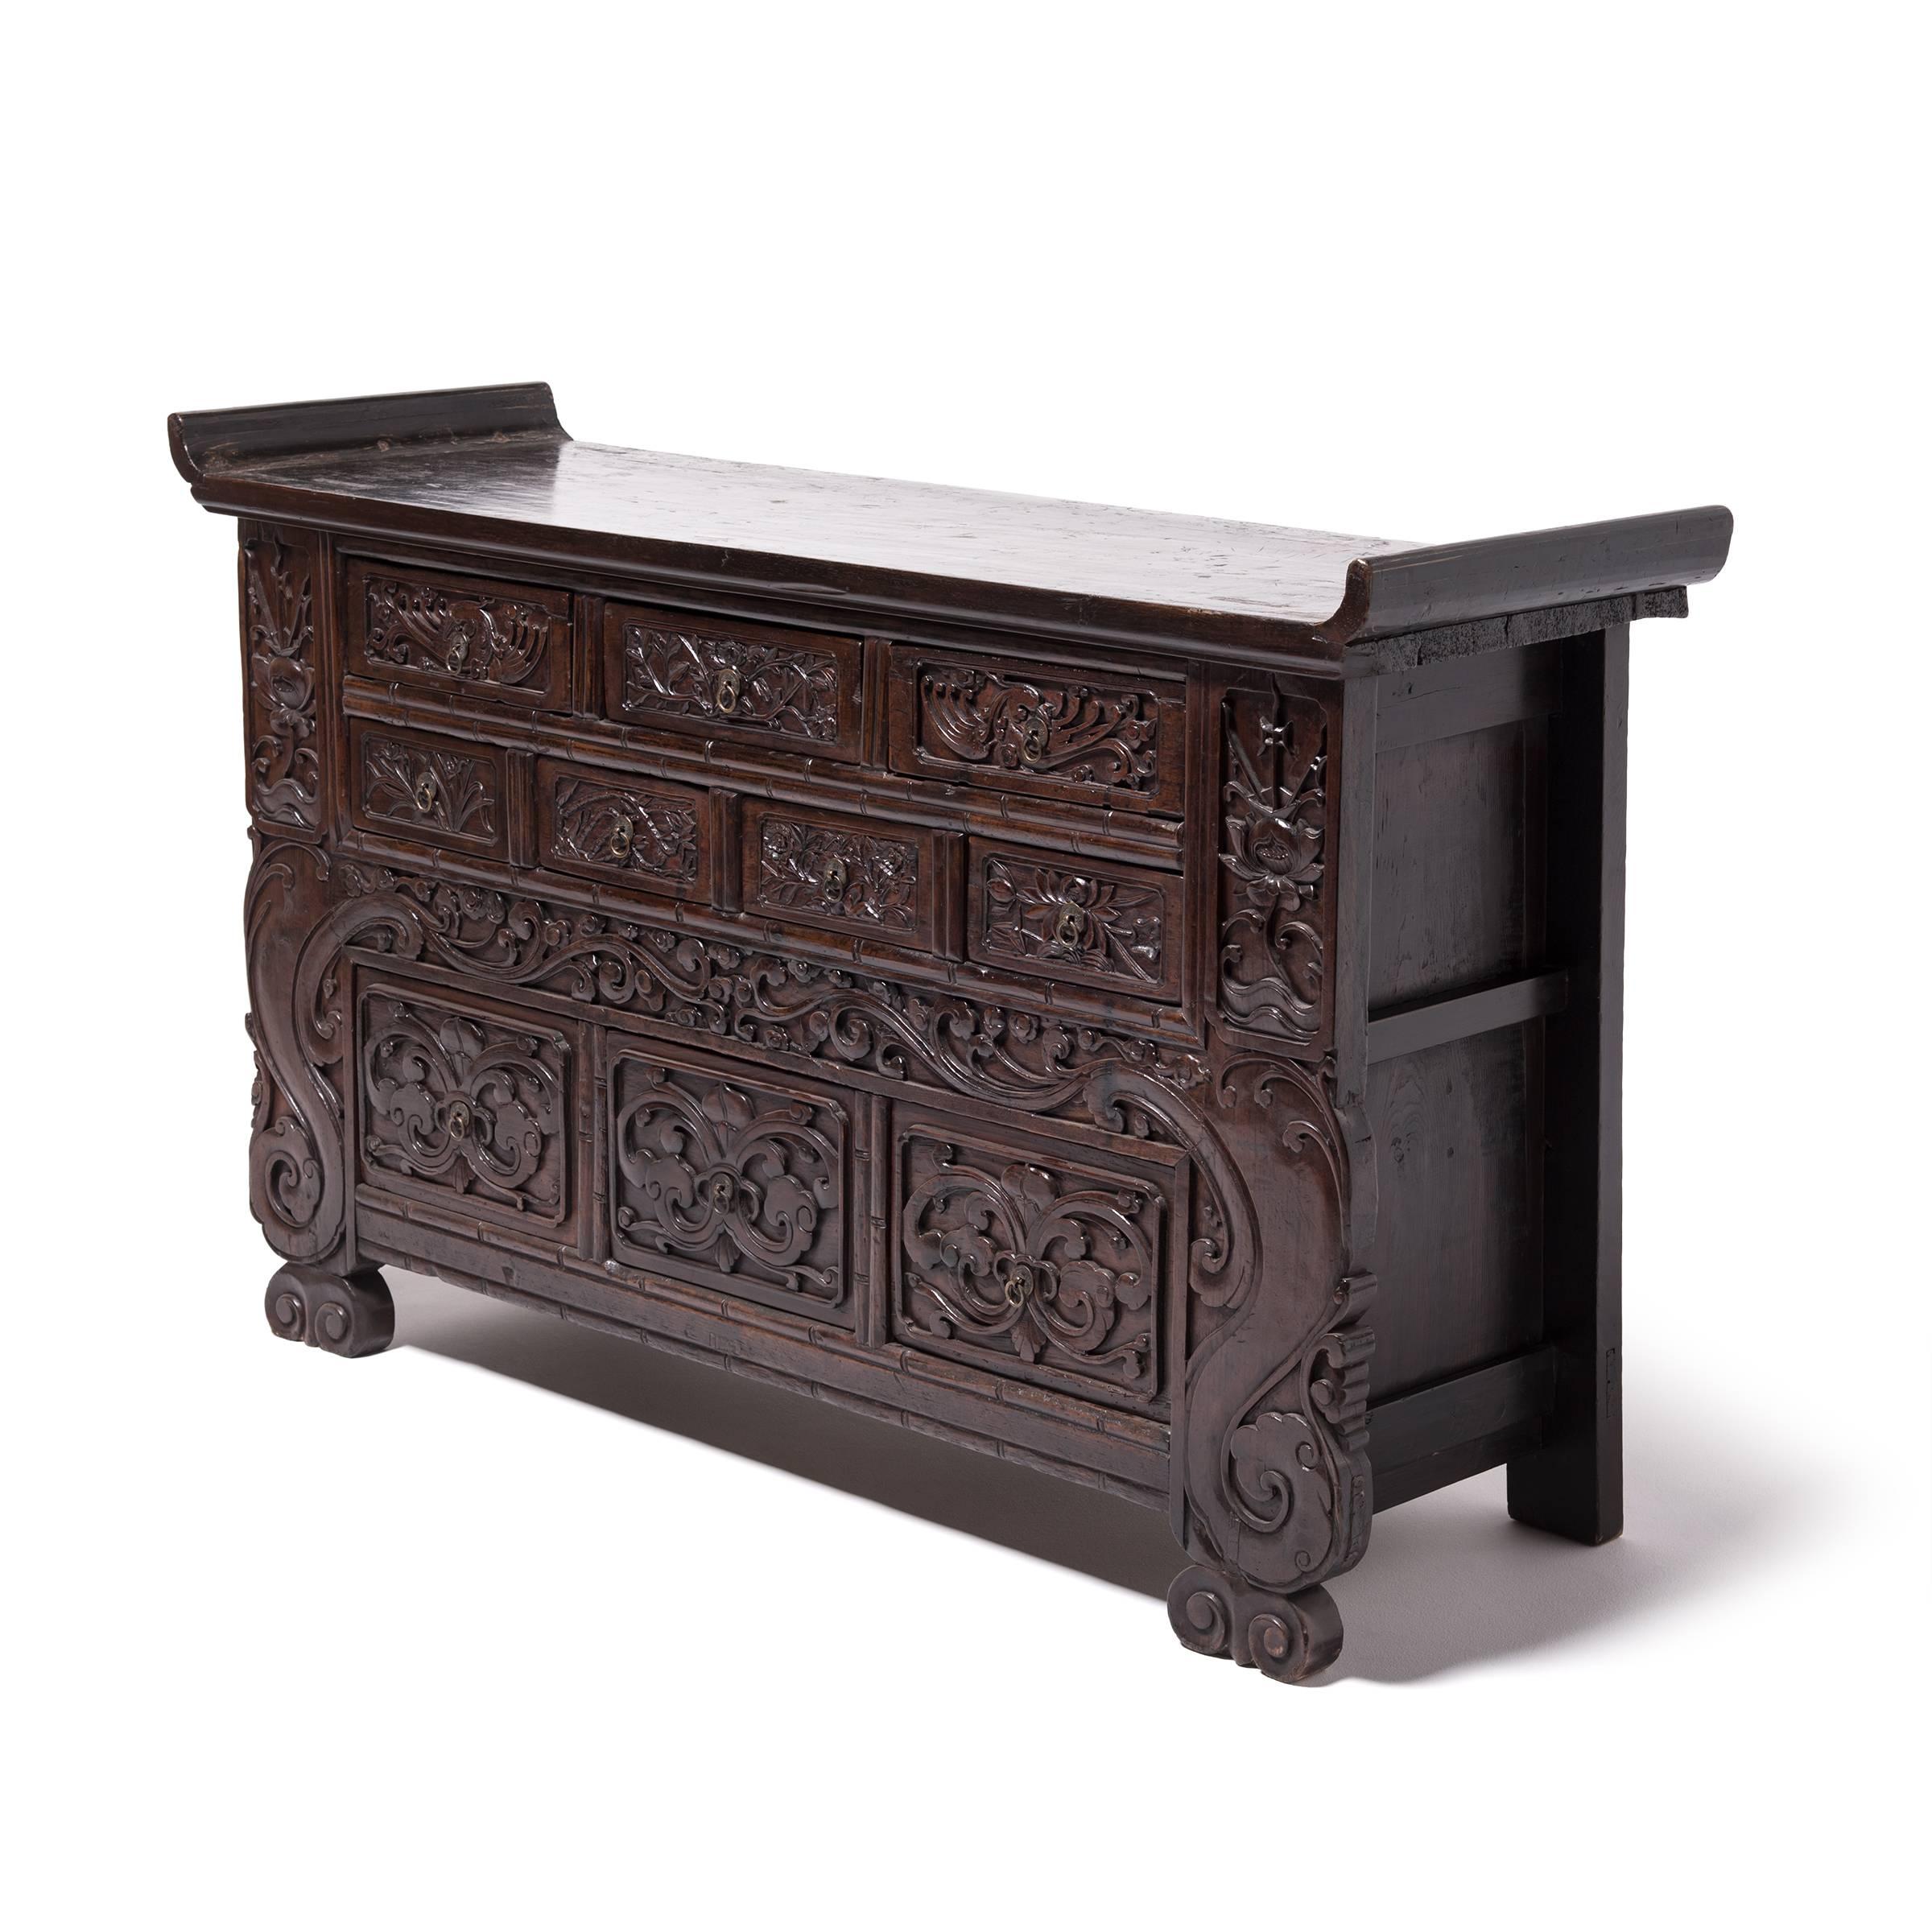 This beautiful chest is a classic Qing dynasty design handcrafted in northern China out of elmwood. The quality of the workmanship is evident in the beautifully carved drawer fronts. The scrolling vine and lotus symbolize purity because the flower